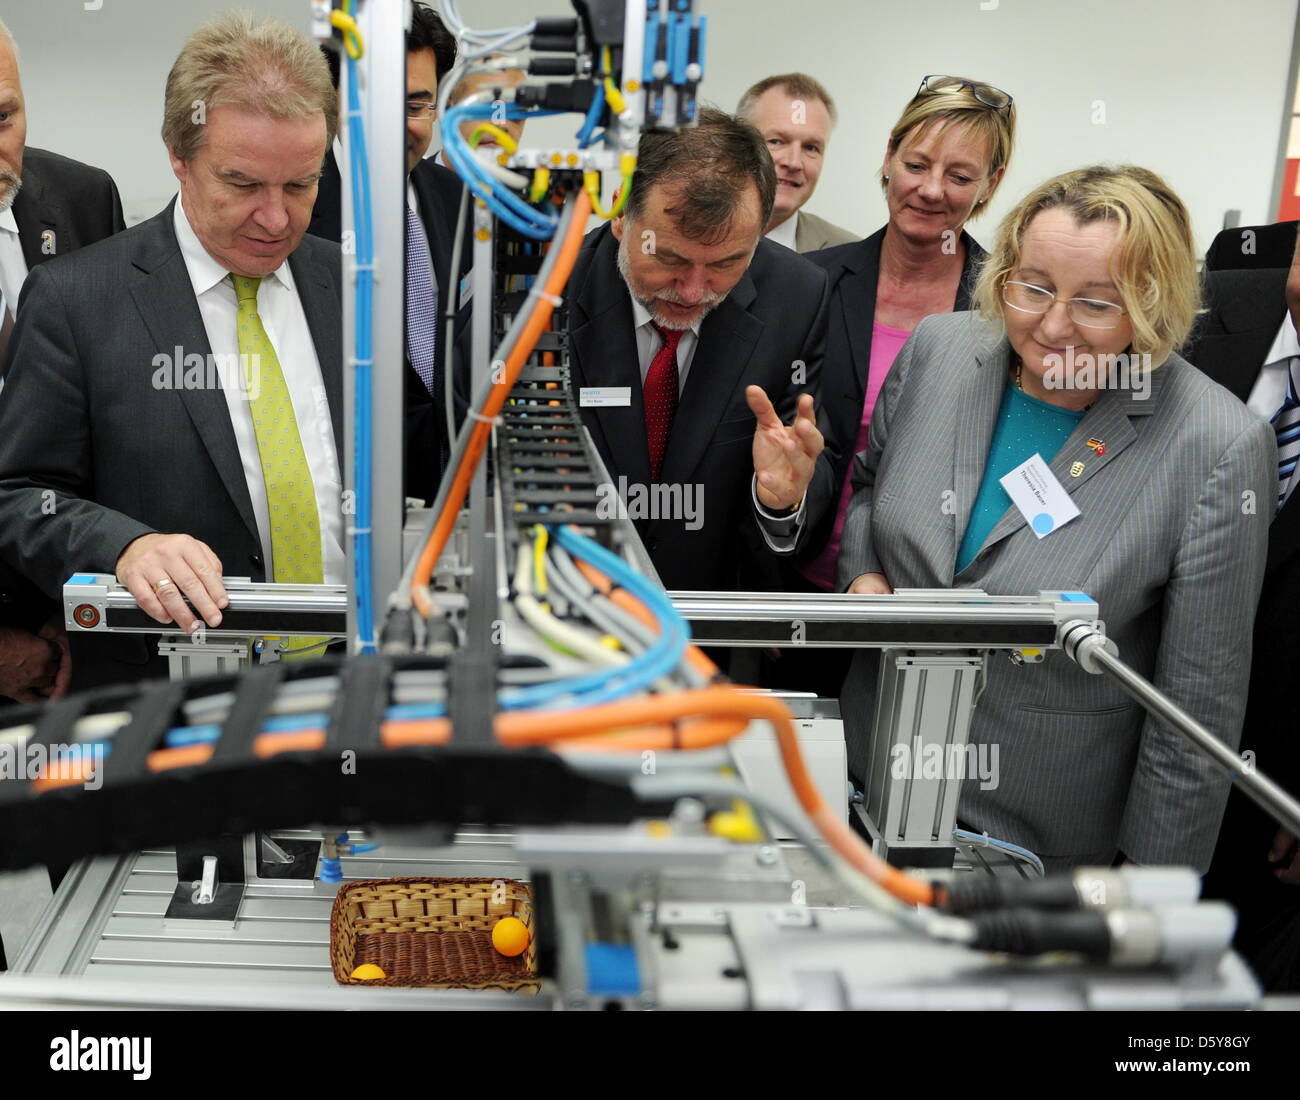 Baden-Wuerttemberg's Environment Minister Franz Untersteller (L), Baden-Wuerttemberg's Minister of Economy Theresia Bauer (R), chairwoman of The Greens in Baden-Wuerttemberg, Edith Sitzmann (2-R) and manager of the Festo Plant, Otto Bauer, observe a Festo machine at a factory of Festo in Instanbul, Turkey, 18 October 2012. The state government of Baden-Wuerttemberg is on a visit to Stock Photo